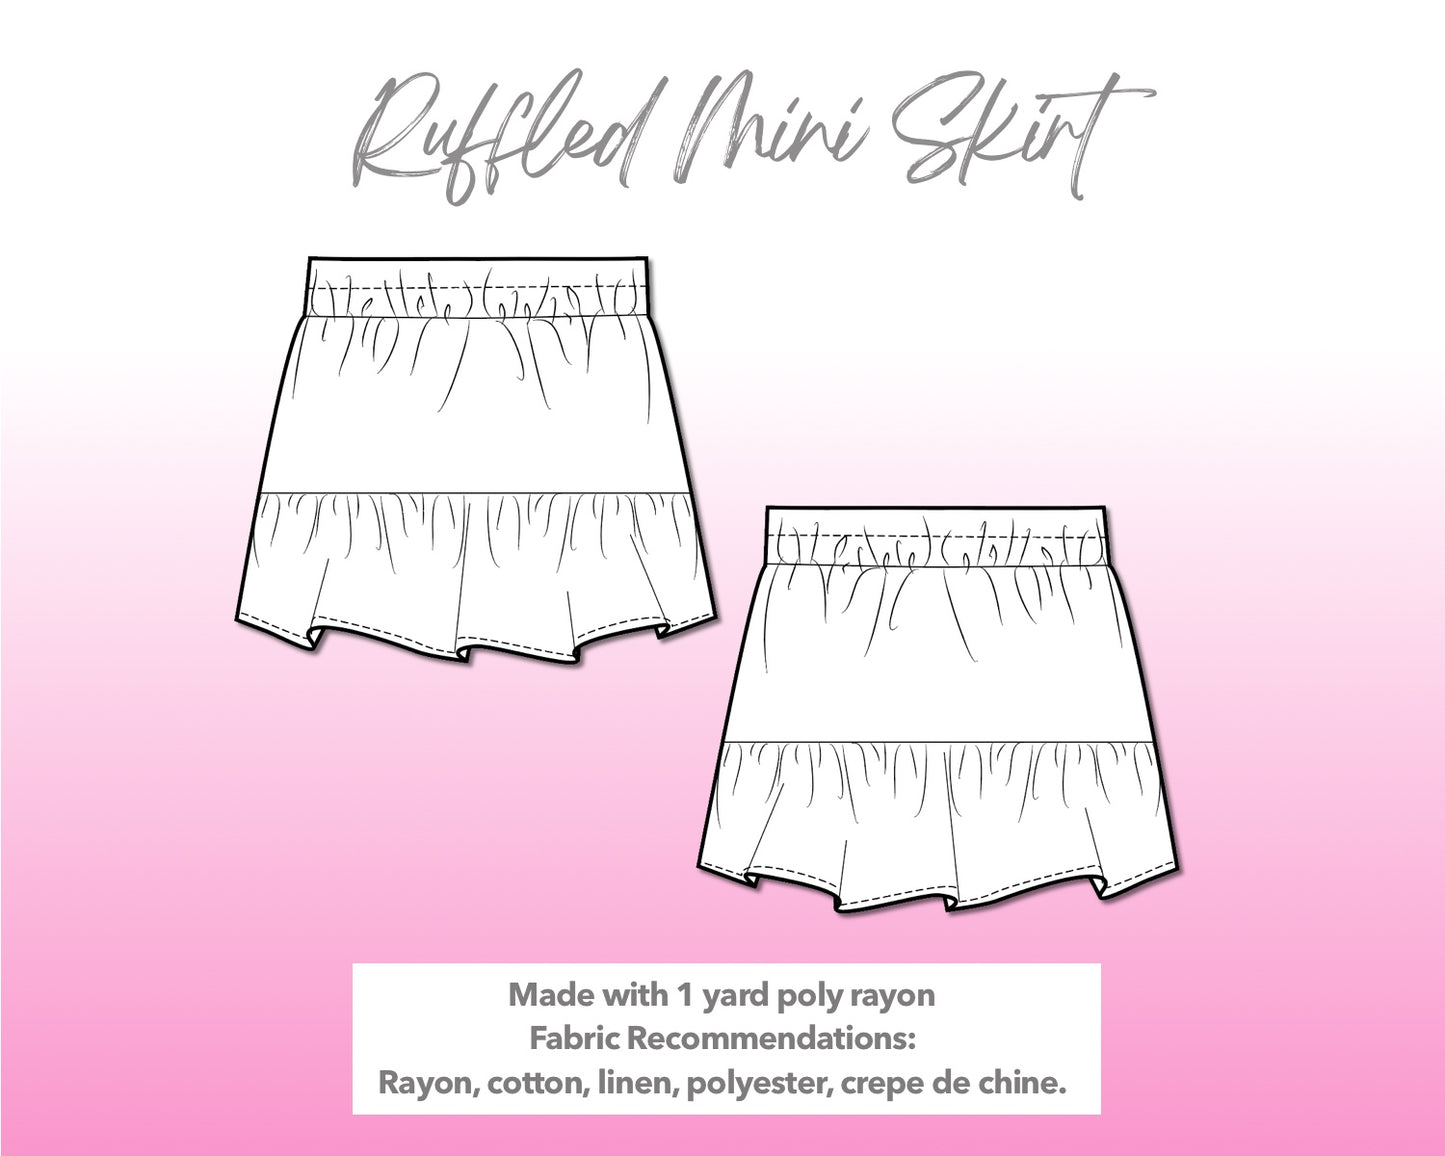 Illustration and detailed description for Ruffled Mini Skirt sewing pattern.